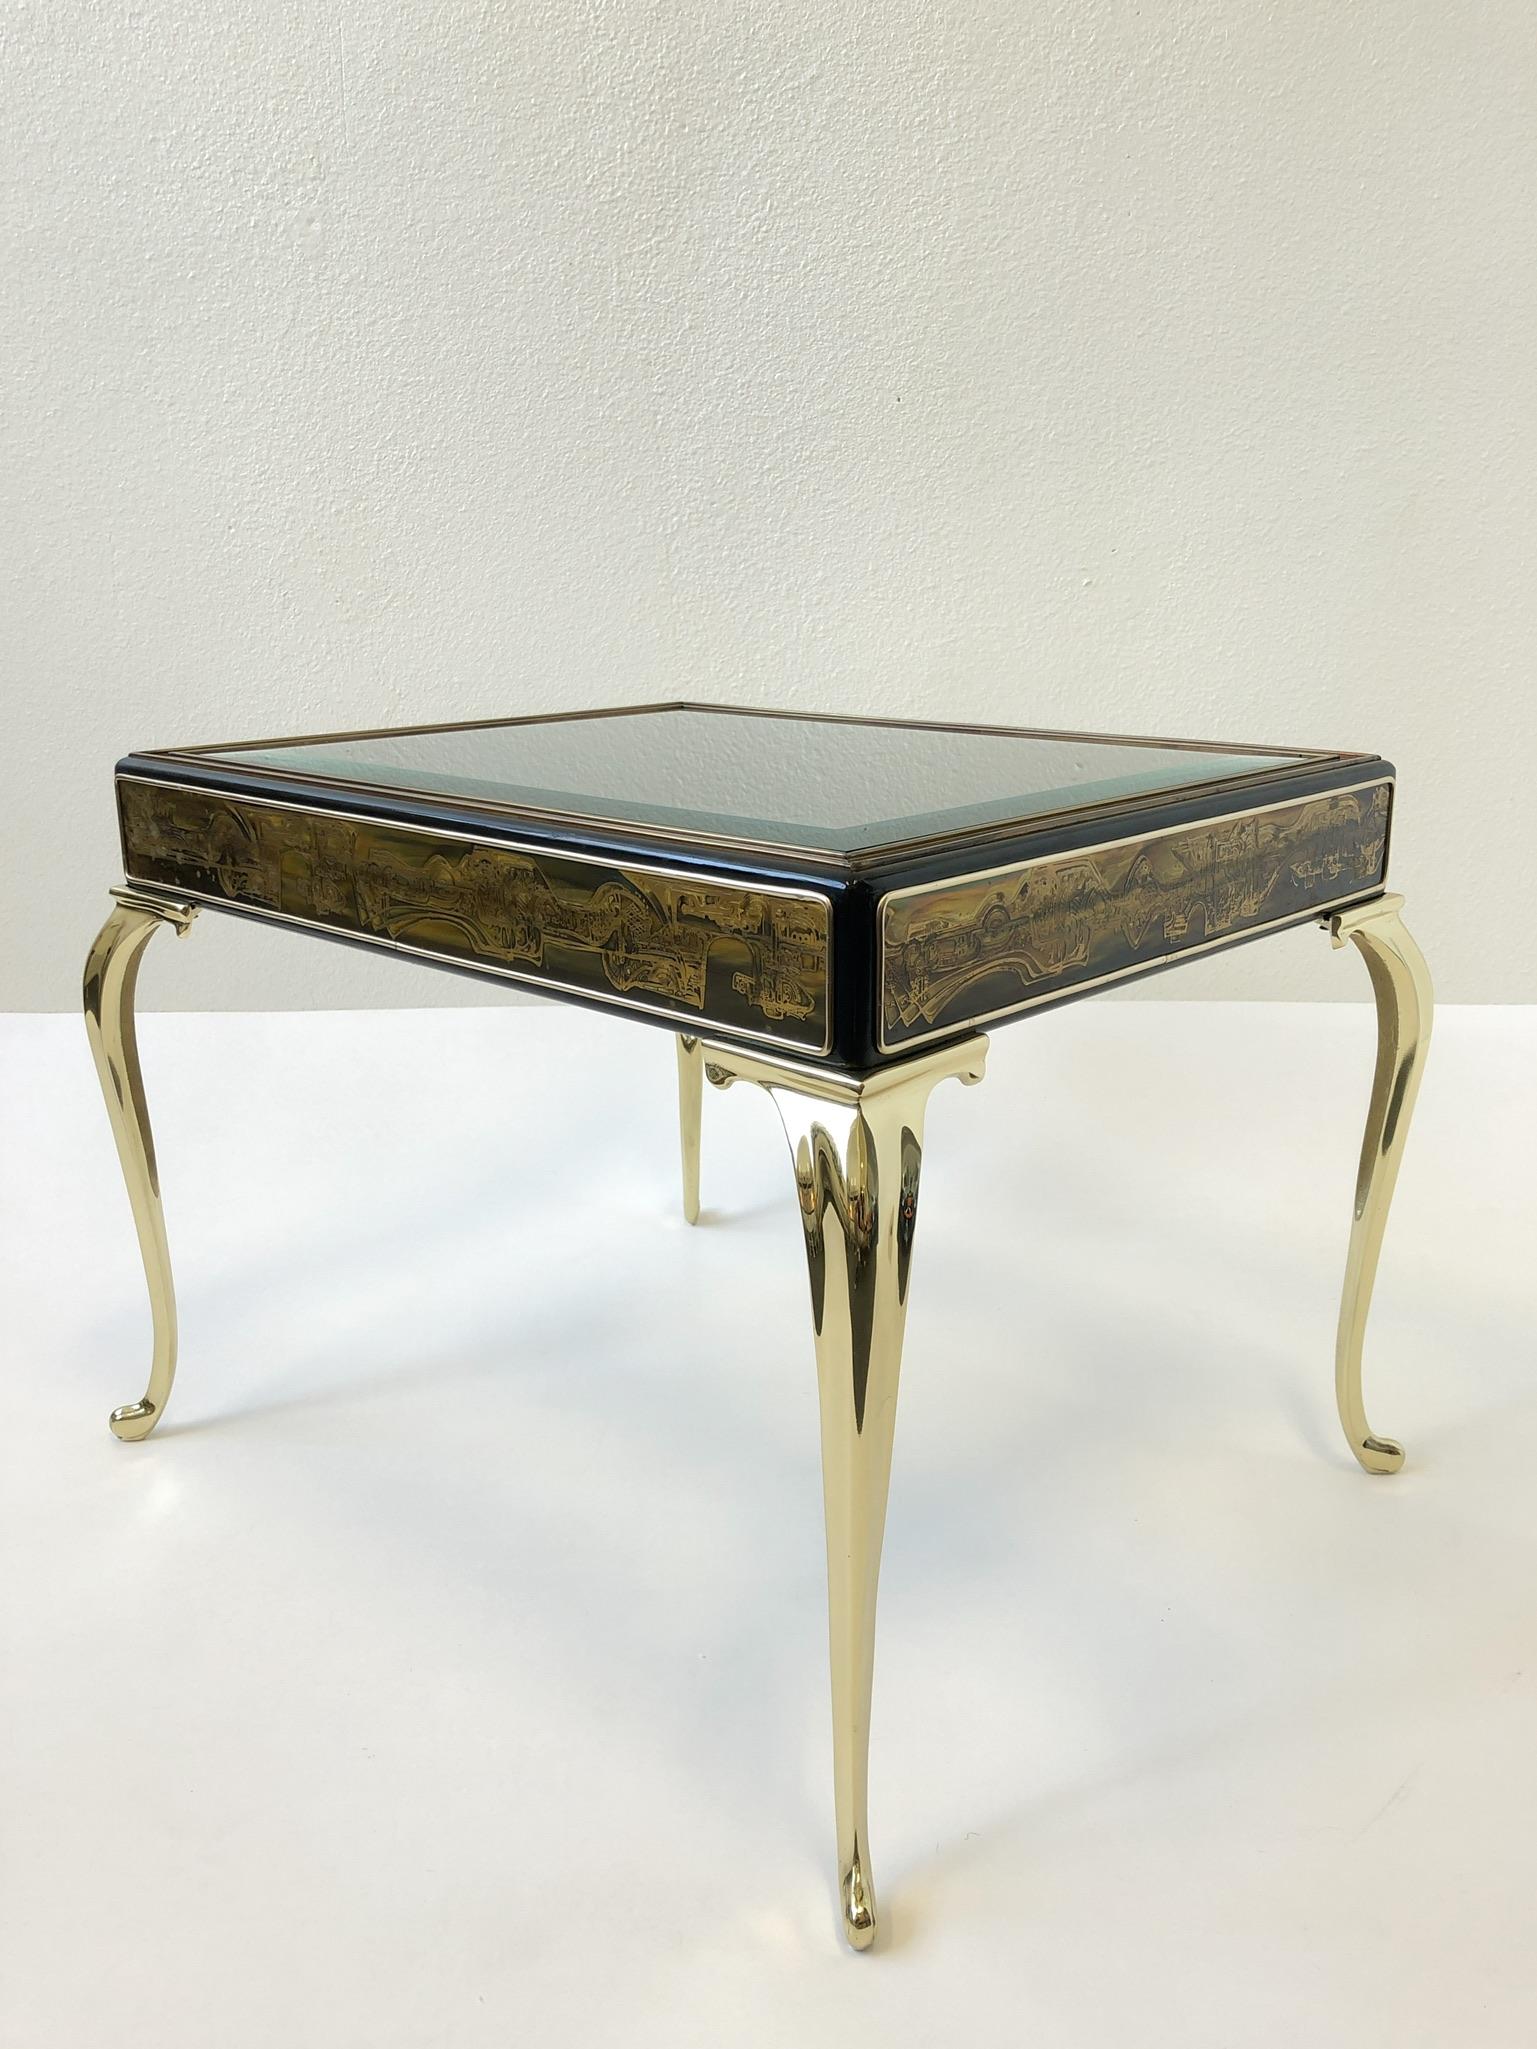 A glamorous polished brass and black lacquer side table design by Bernhard Rohne for Mastercraft in the 1970s. The table is constructed of solid polish brass legs the frame is wood black lacquered with acid edje design attached on the sides and the